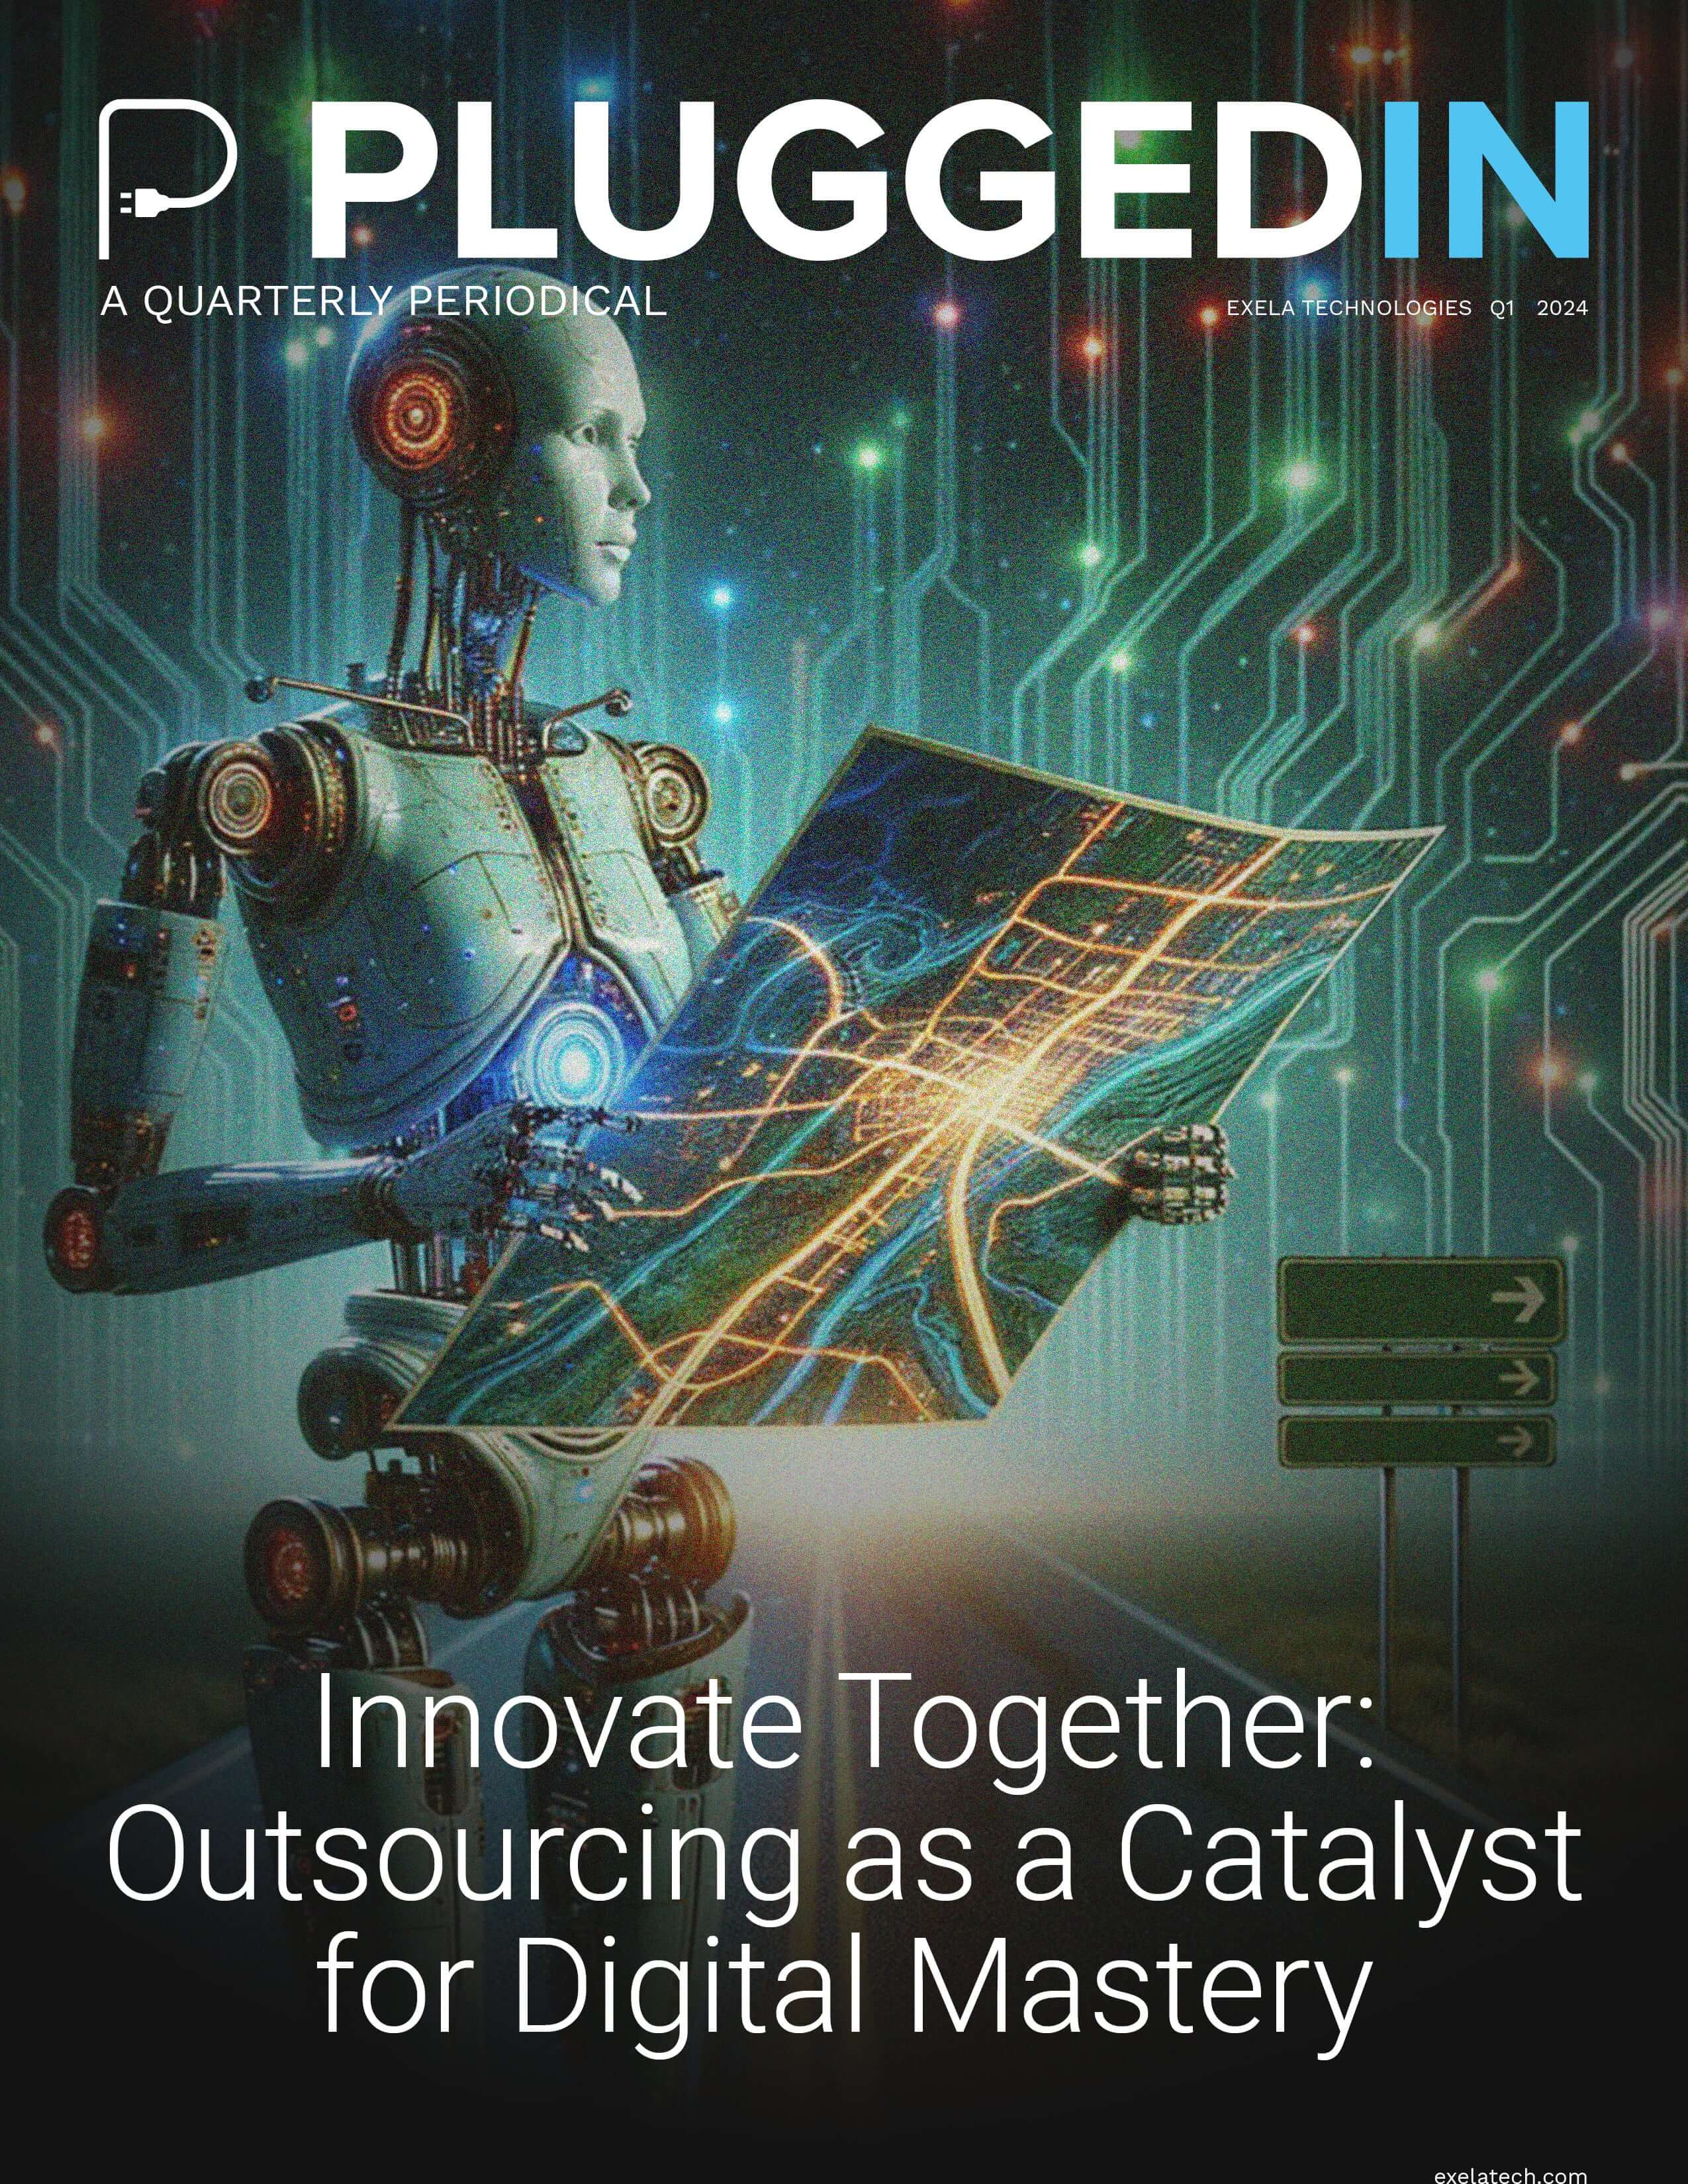 The image displays the cover of "PLUGGED IN," a 2024 quarterly periodical by Exela Technologies. It features a robotic figure holding a glowing digital blueprint, with a circuit board backdrop transitioning into outer space. The cover headline states "Innovate Together: Outsourcing as a Catalyst for Digital Mastery," and the website "exelatech.com" is listed at the bottom.